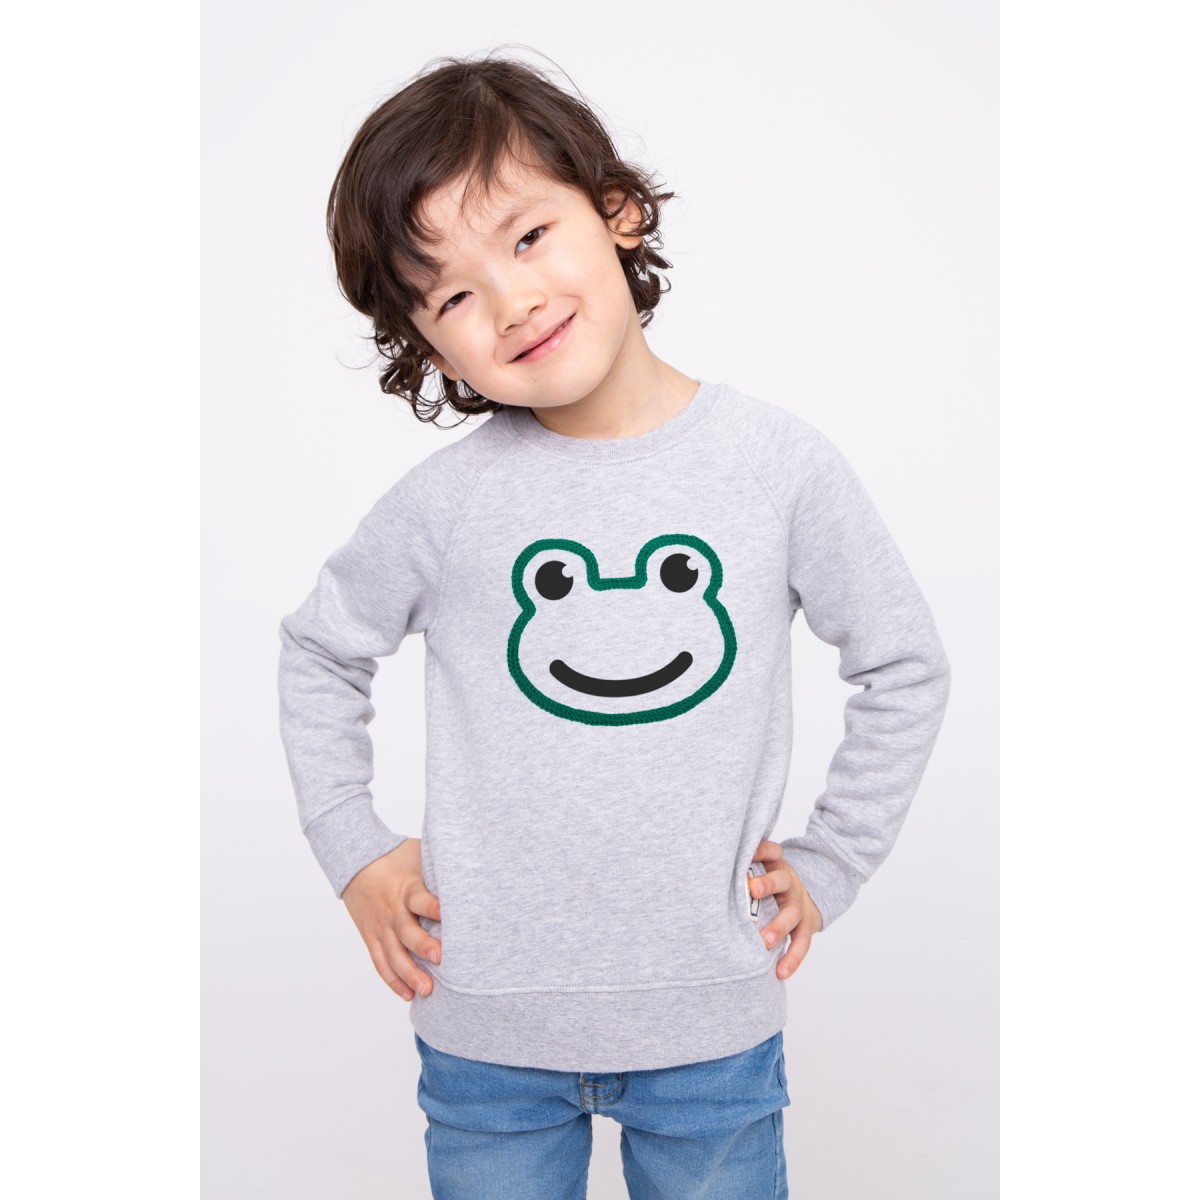 French Disorder - Sweat enfant gris chiné grenouille